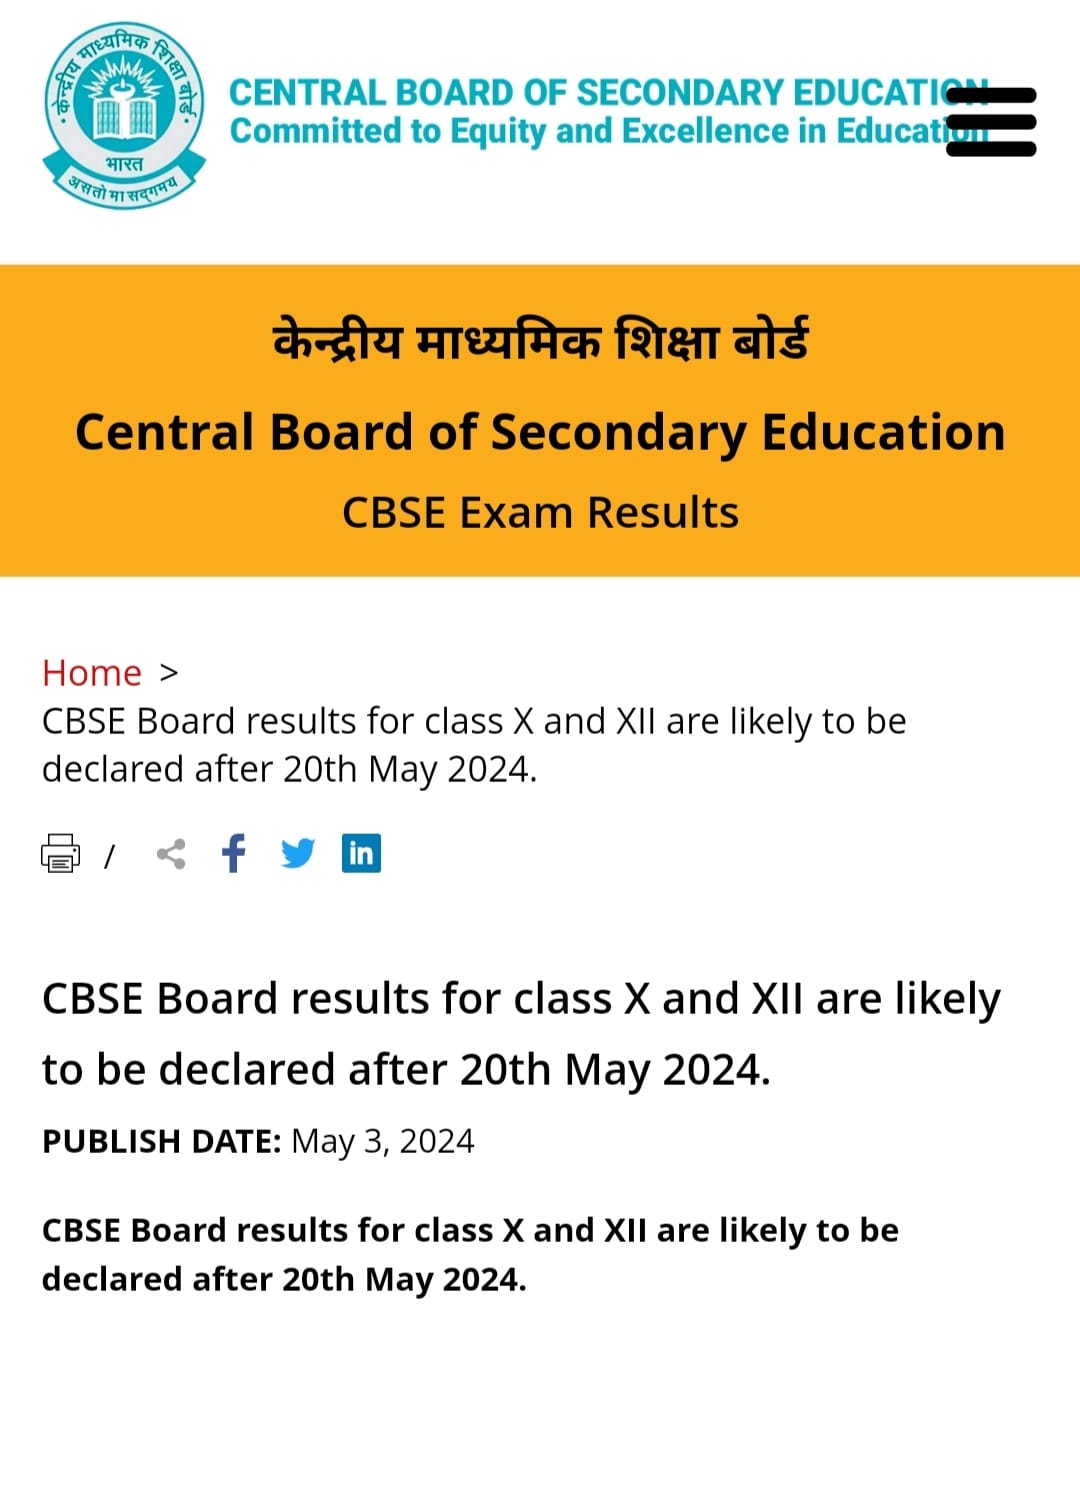 CBSE Class X and XII Results to be revealed after May 20, 2024